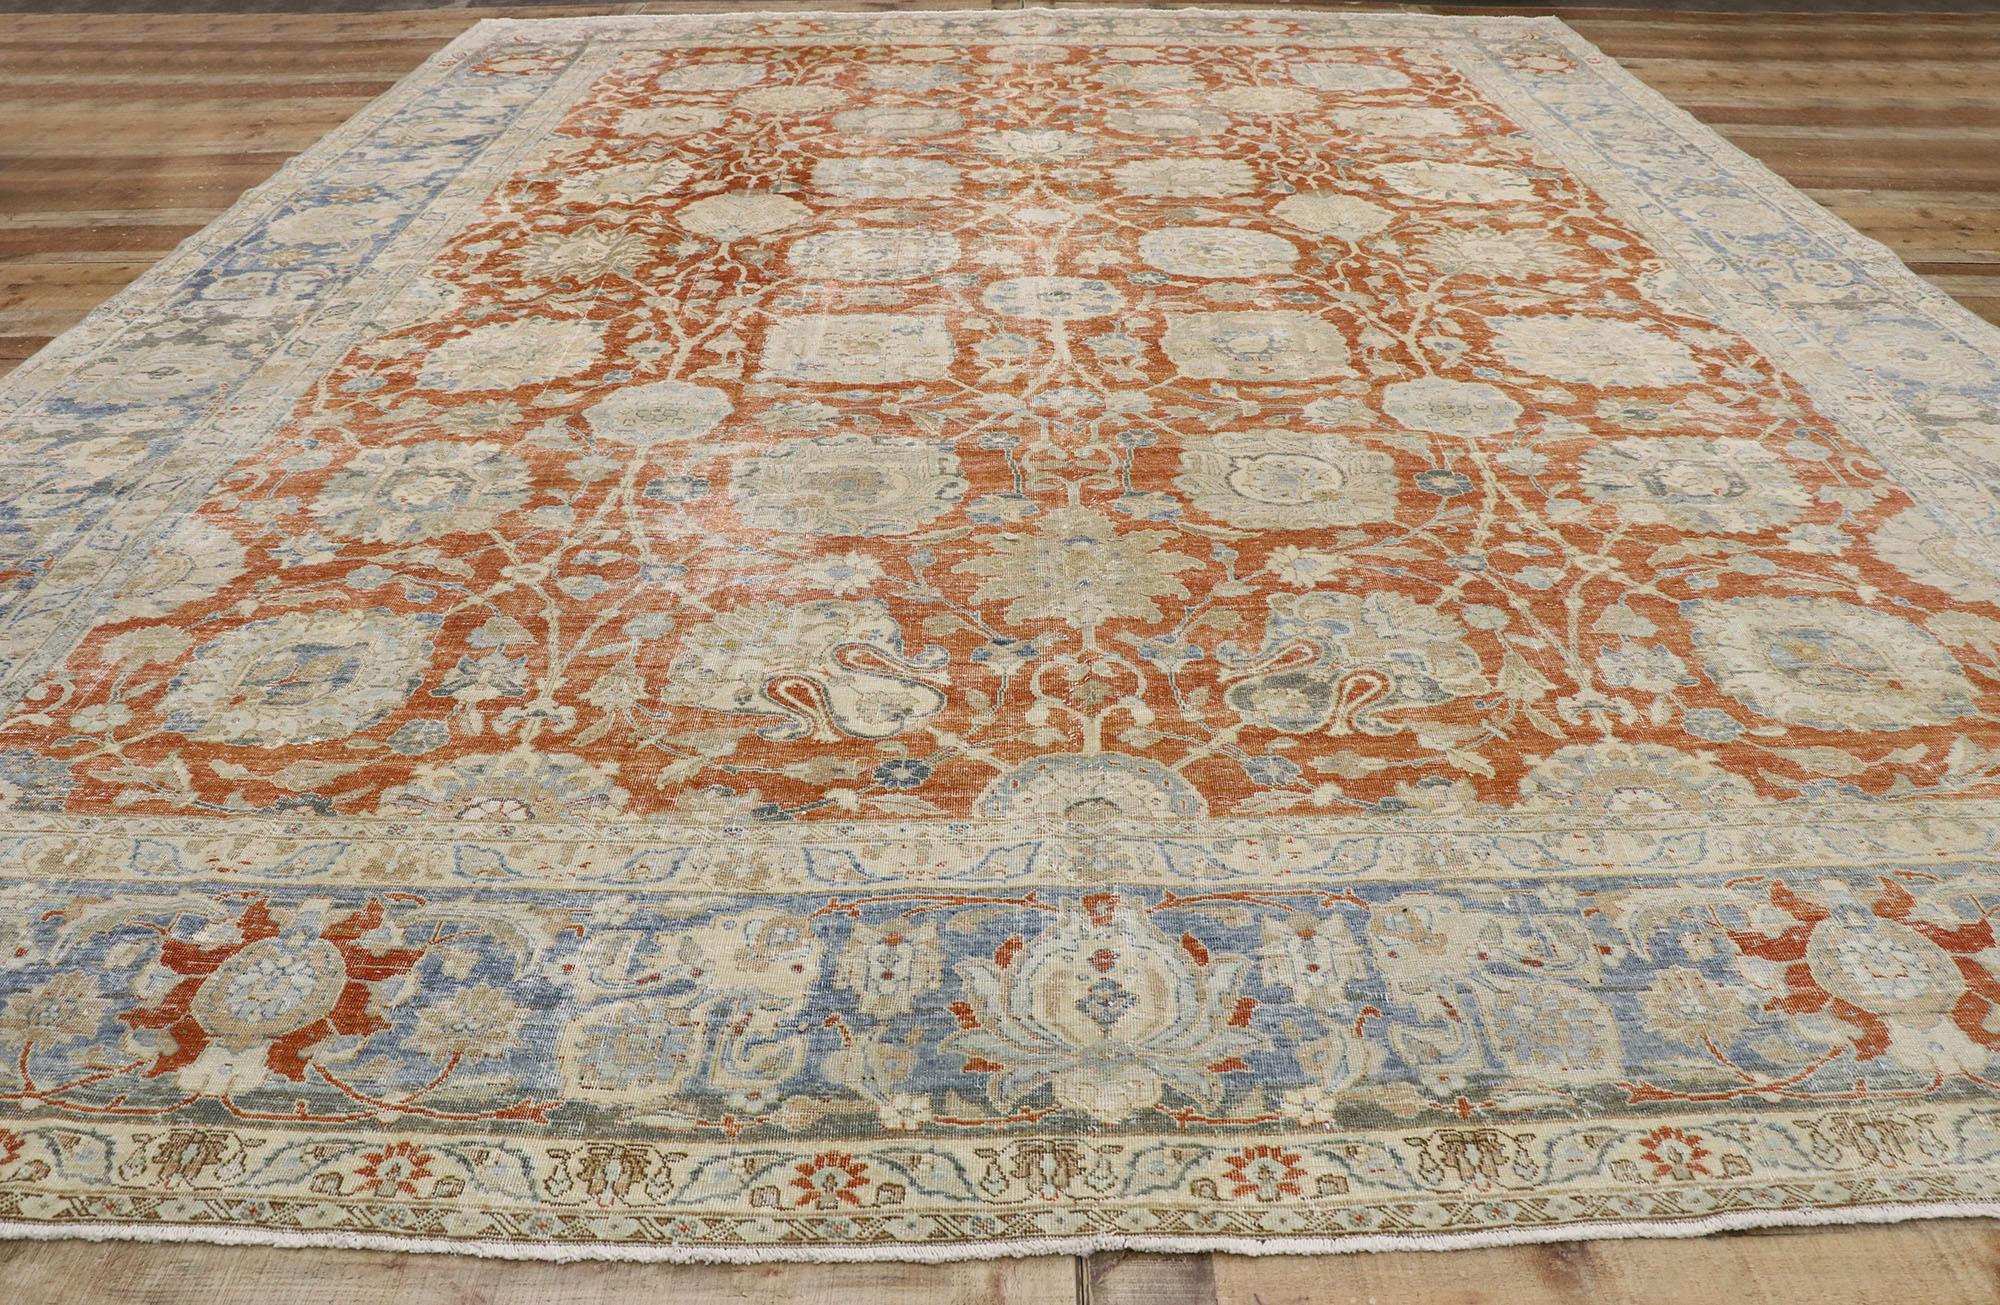 Distressed Antique Persian Tabriz Rug with Rustic Colonial Style 1